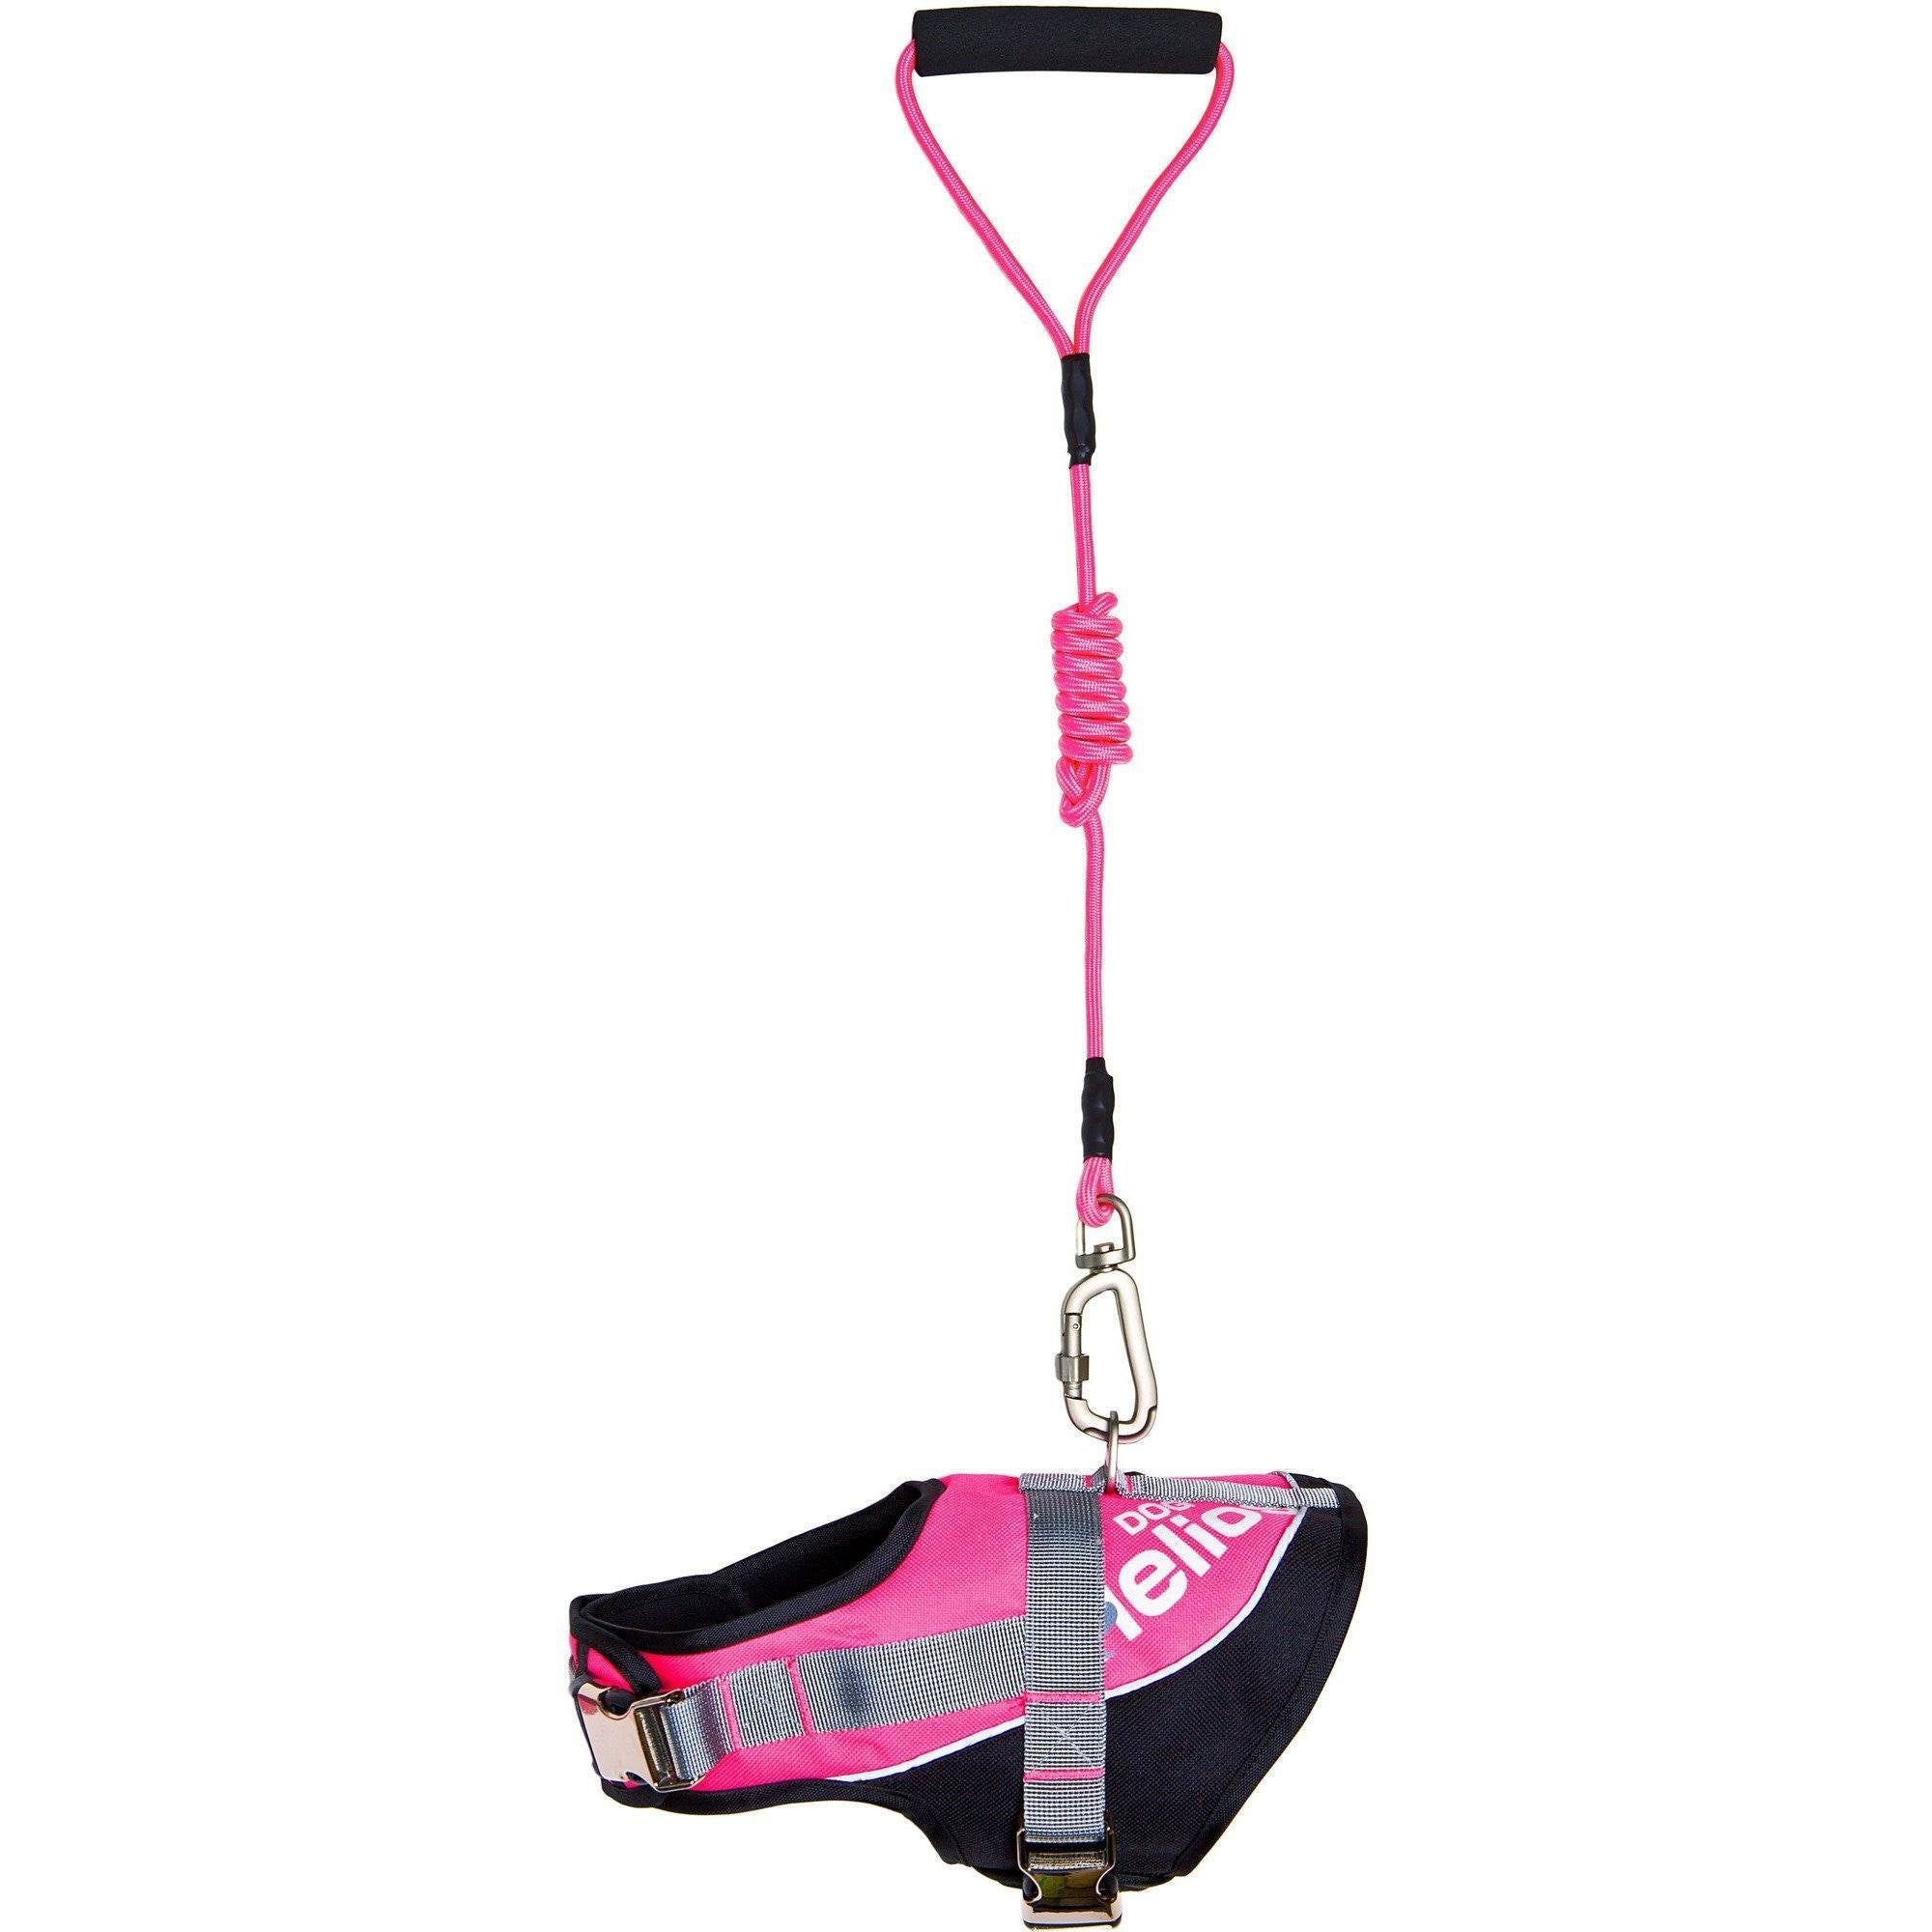 Dog Helios ® 'Bark-Mudder' 2-in-1 Reflective and Adjustable Sporty Dog Harness and Leash Small Pink